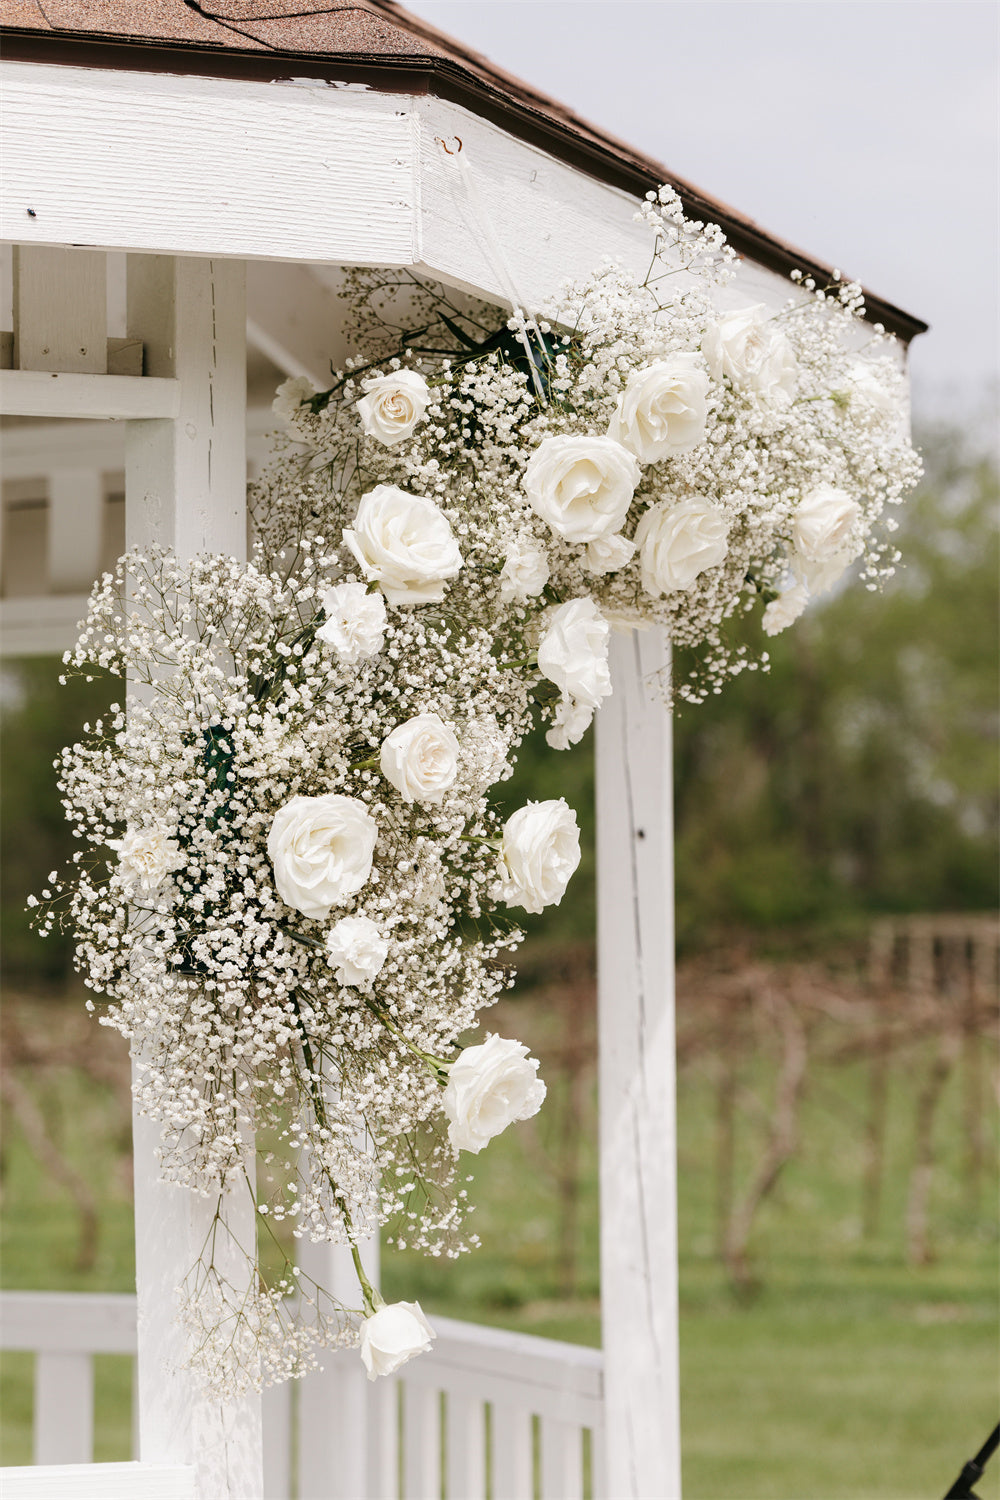 Baby's Breath Flower Decorations For Outdoor Weddings